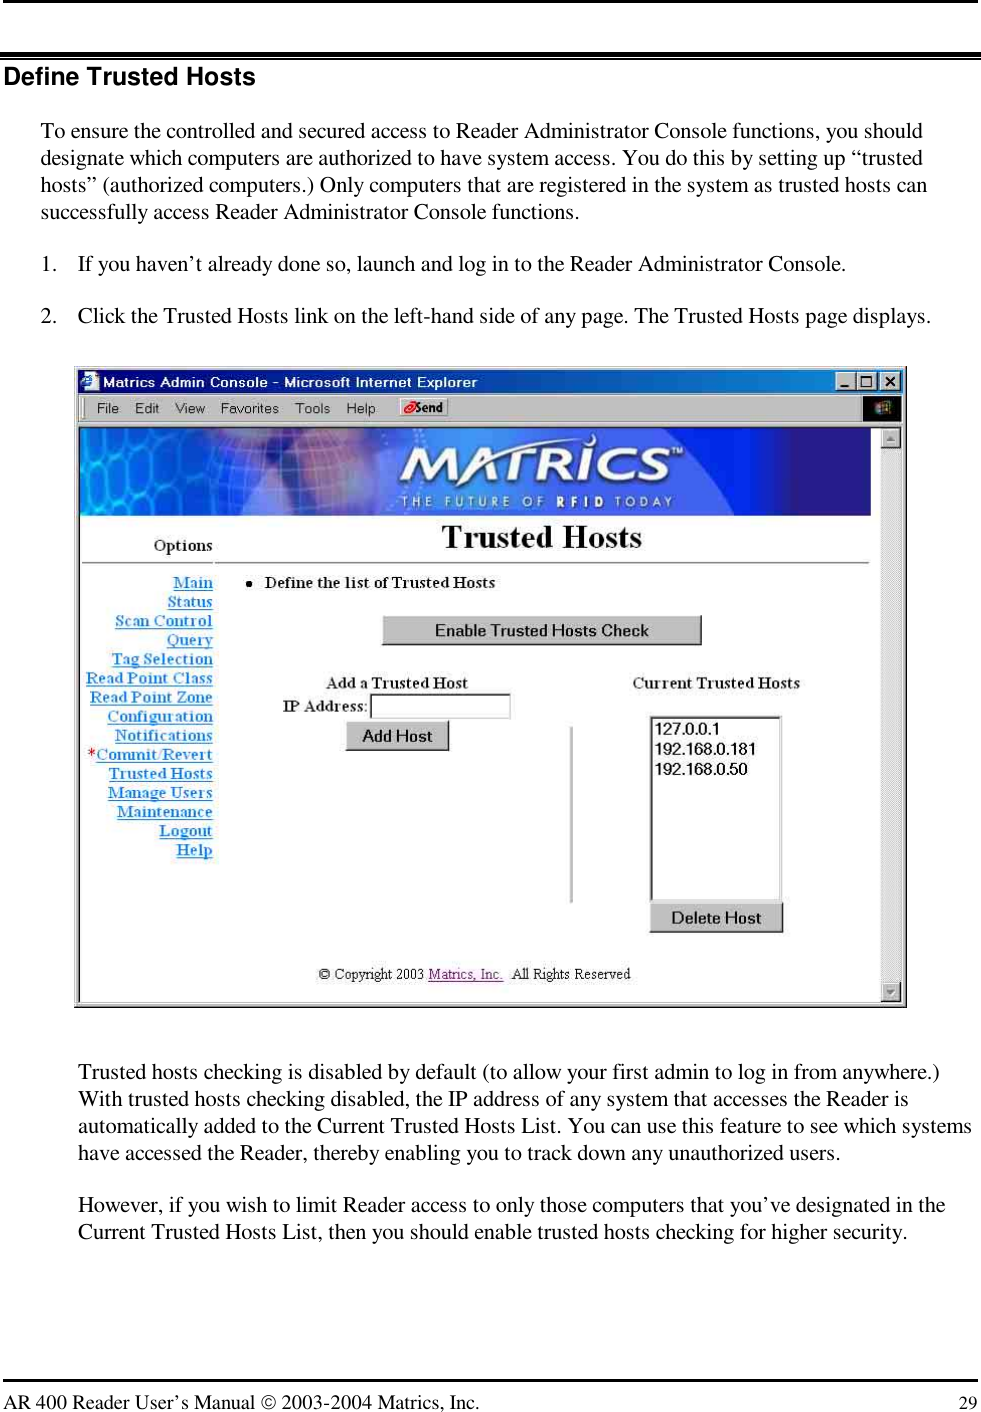   AR 400 Reader User’s Manual  2003-2004 Matrics, Inc.  29 Define Trusted Hosts To ensure the controlled and secured access to Reader Administrator Console functions, you should designate which computers are authorized to have system access. You do this by setting up “trusted hosts” (authorized computers.) Only computers that are registered in the system as trusted hosts can successfully access Reader Administrator Console functions. 1.  If you haven’t already done so, launch and log in to the Reader Administrator Console. 2.  Click the Trusted Hosts link on the left-hand side of any page. The Trusted Hosts page displays.  Trusted hosts checking is disabled by default (to allow your first admin to log in from anywhere.) With trusted hosts checking disabled, the IP address of any system that accesses the Reader is automatically added to the Current Trusted Hosts List. You can use this feature to see which systems have accessed the Reader, thereby enabling you to track down any unauthorized users. However, if you wish to limit Reader access to only those computers that you’ve designated in the Current Trusted Hosts List, then you should enable trusted hosts checking for higher security. 